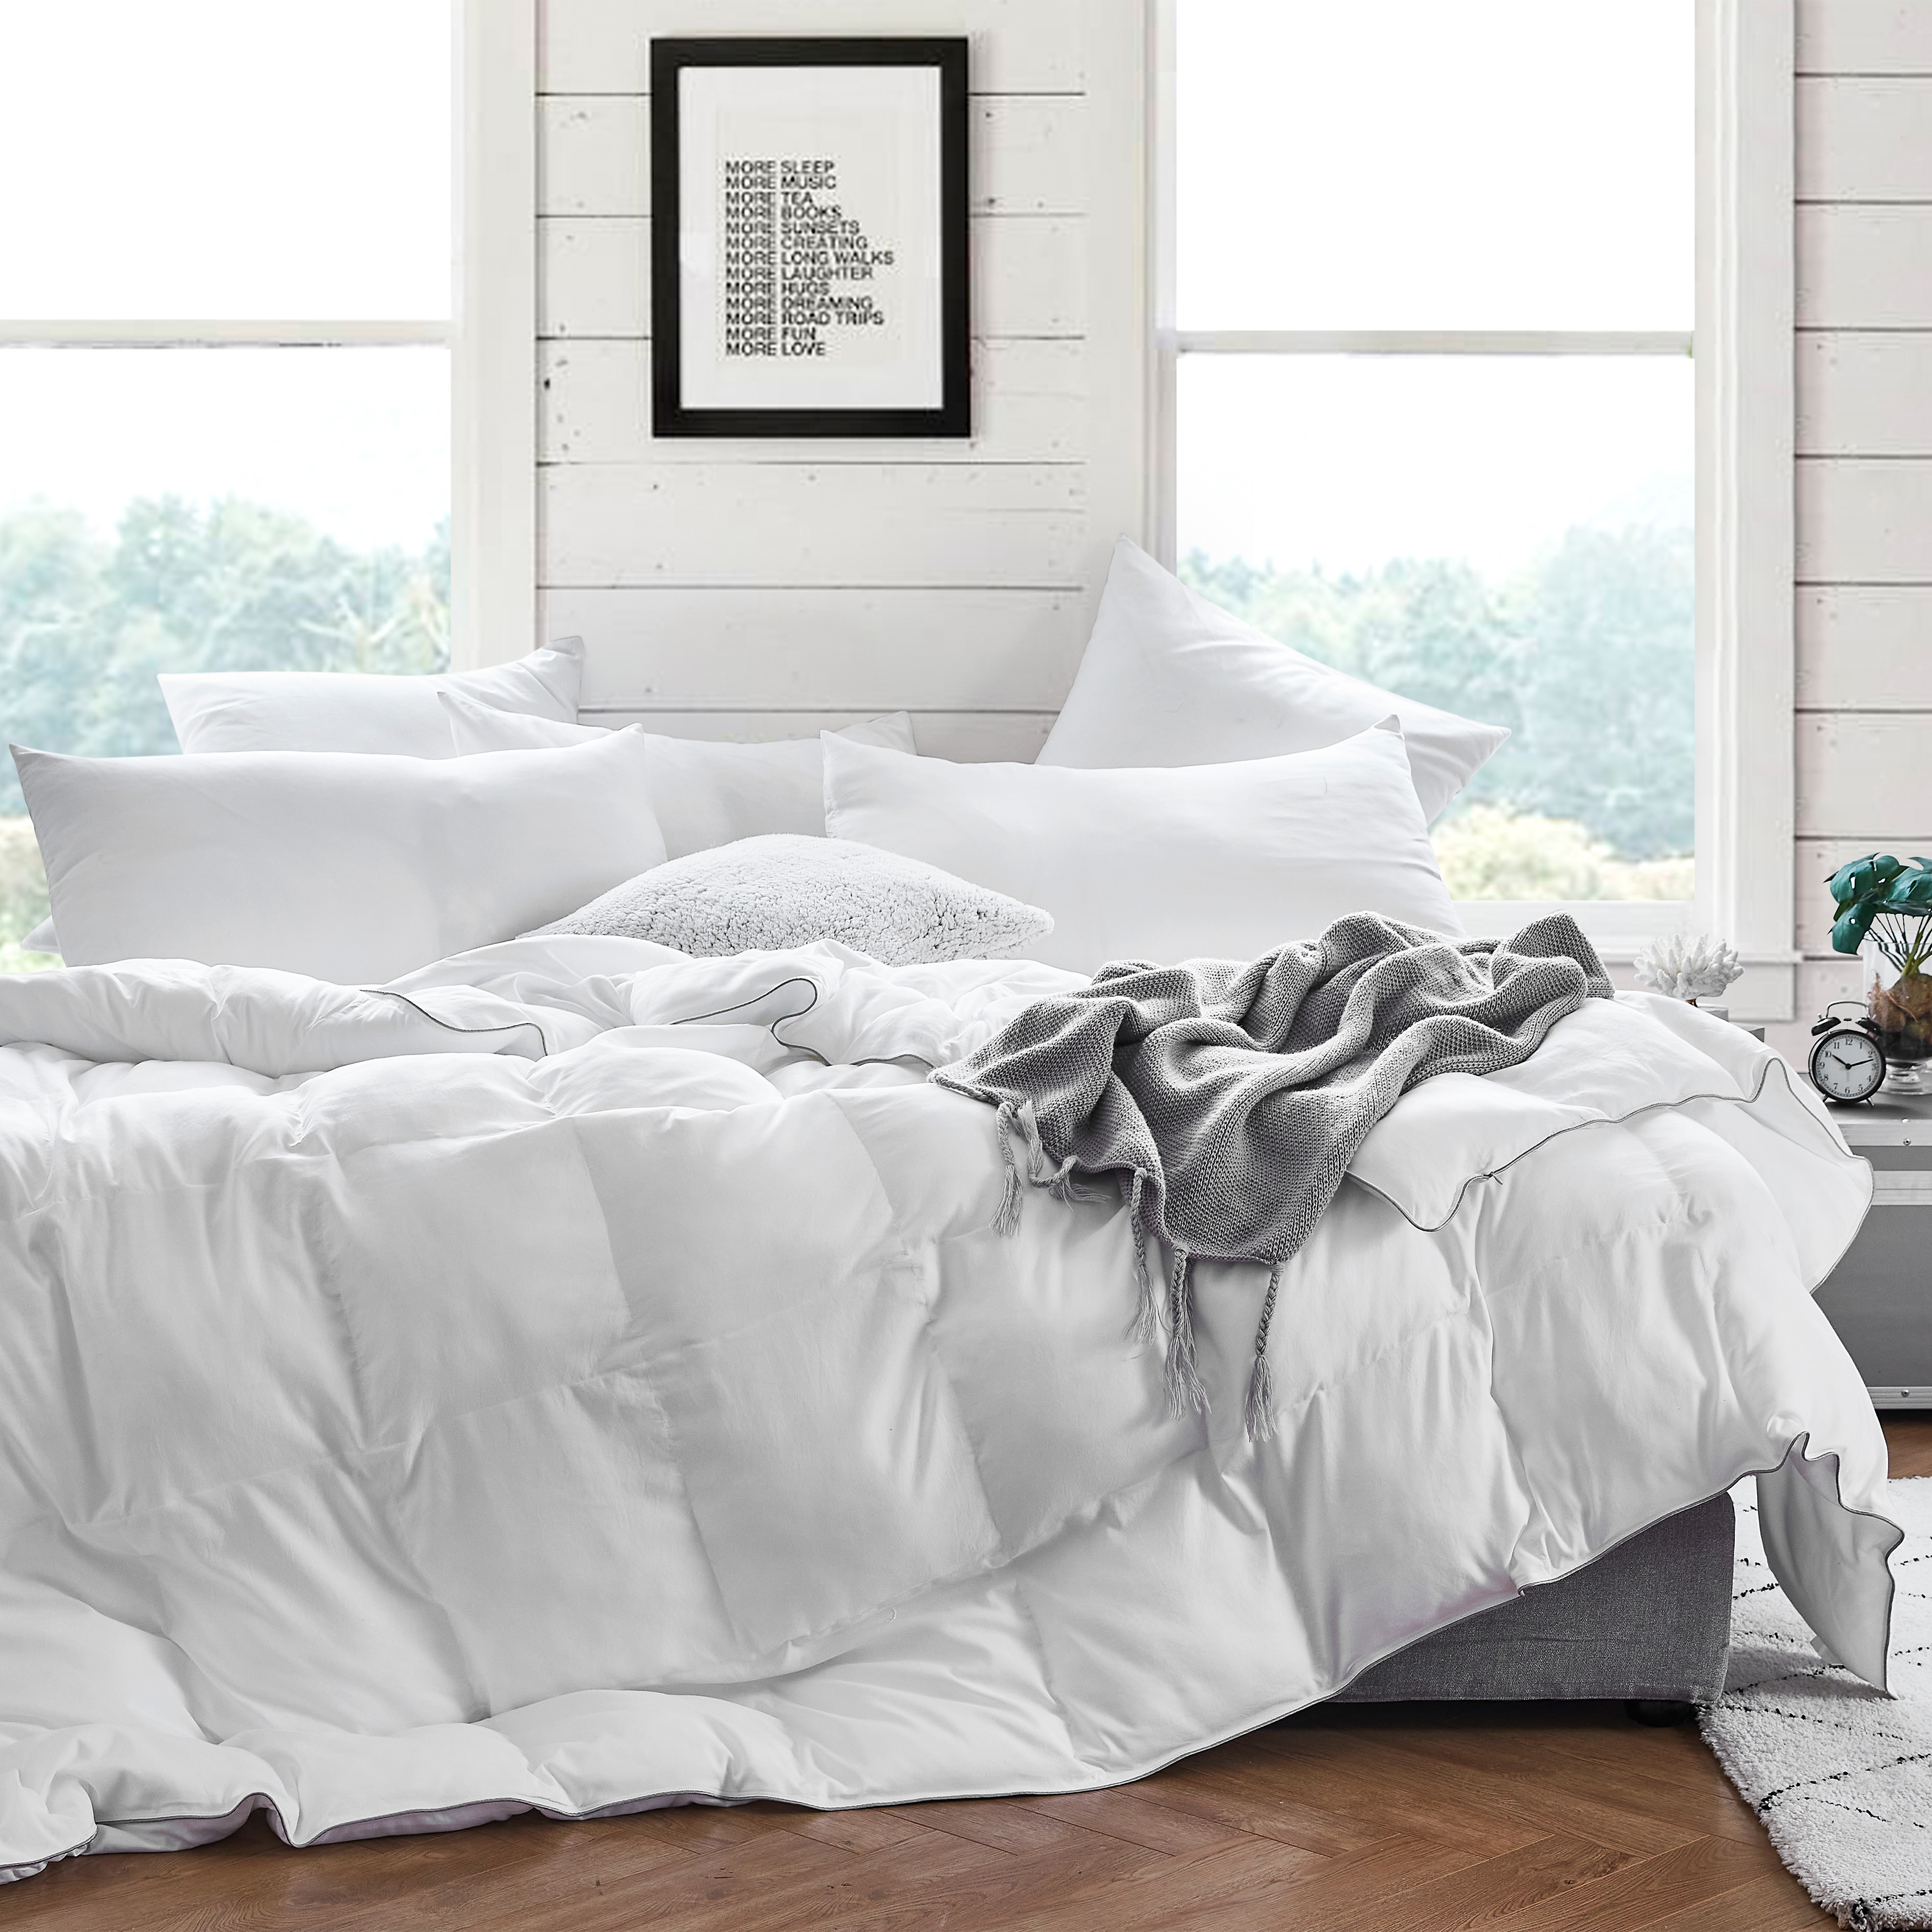 Snorze Cloud Comforter - Coma Inducer - Oversized Comforter in White